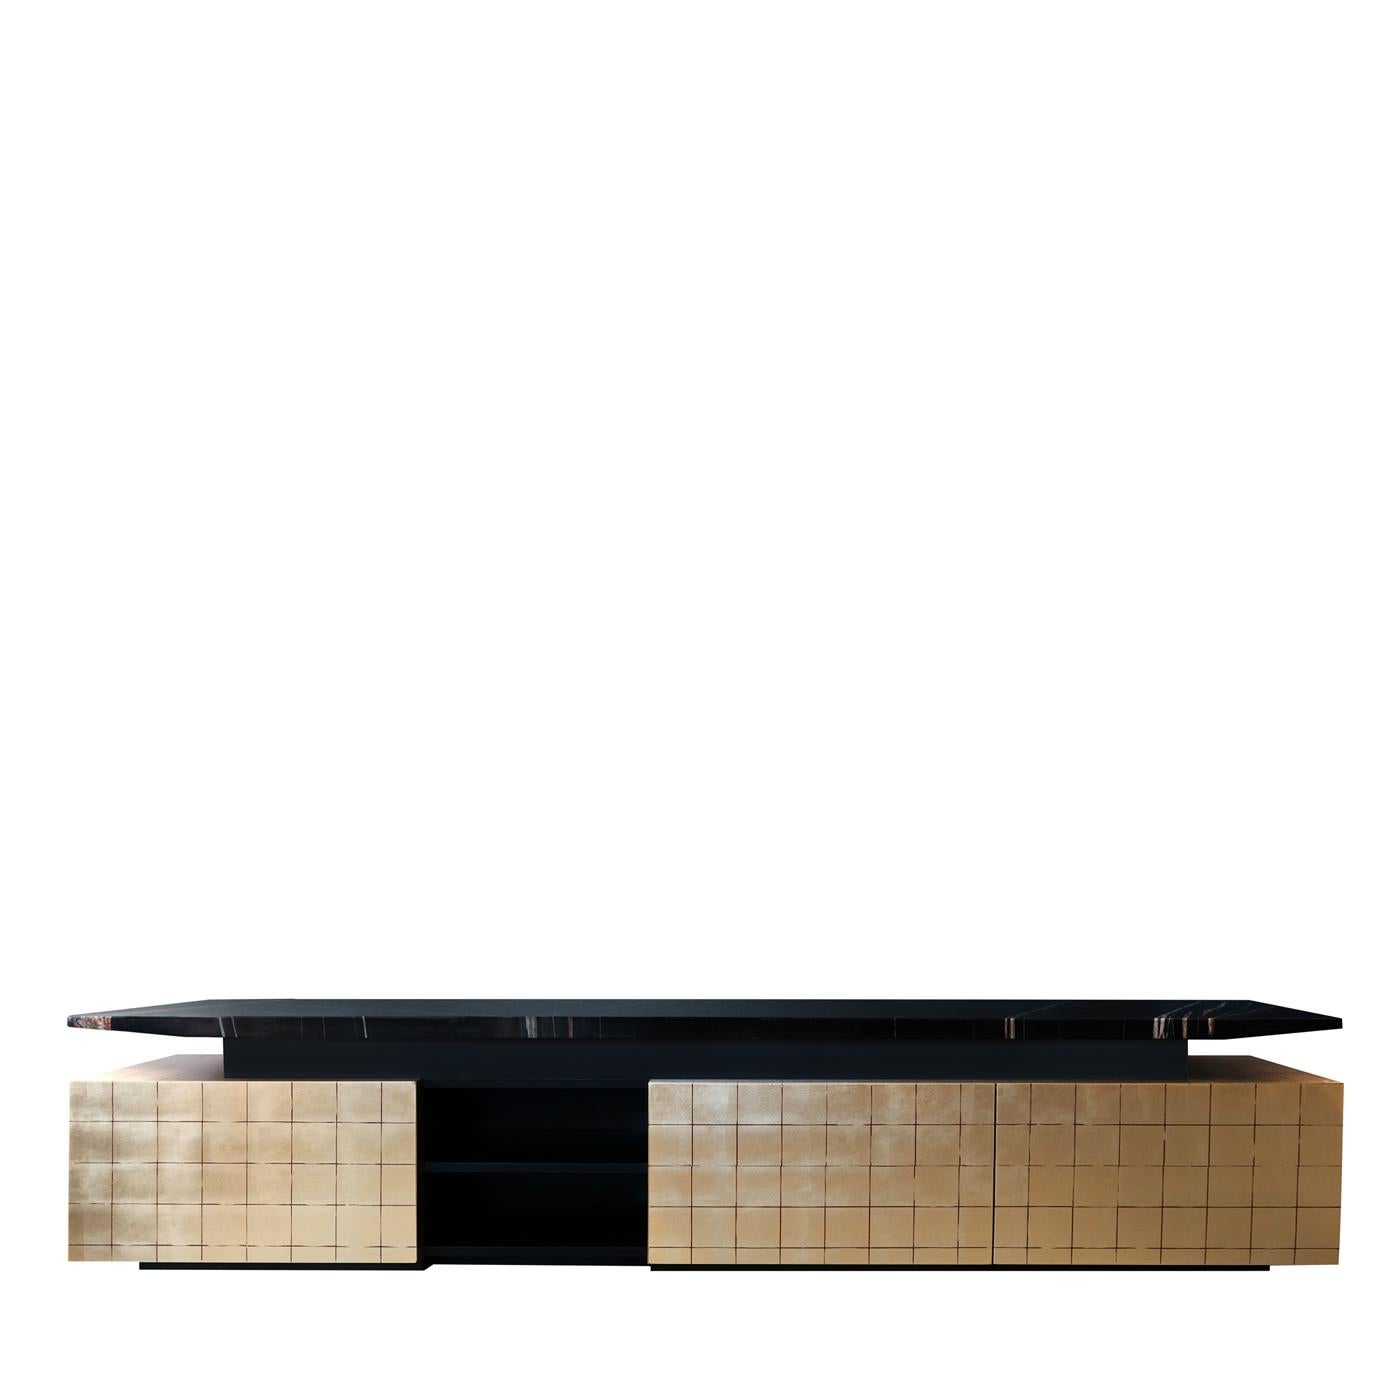 This sculptural objet d'art is a sideboard that can function as TV stand thanks to its generous size. Splendidly crafted, it is composed of three drawers and central open shelves finished with a shiny black polyurethane lacquer, elegantly